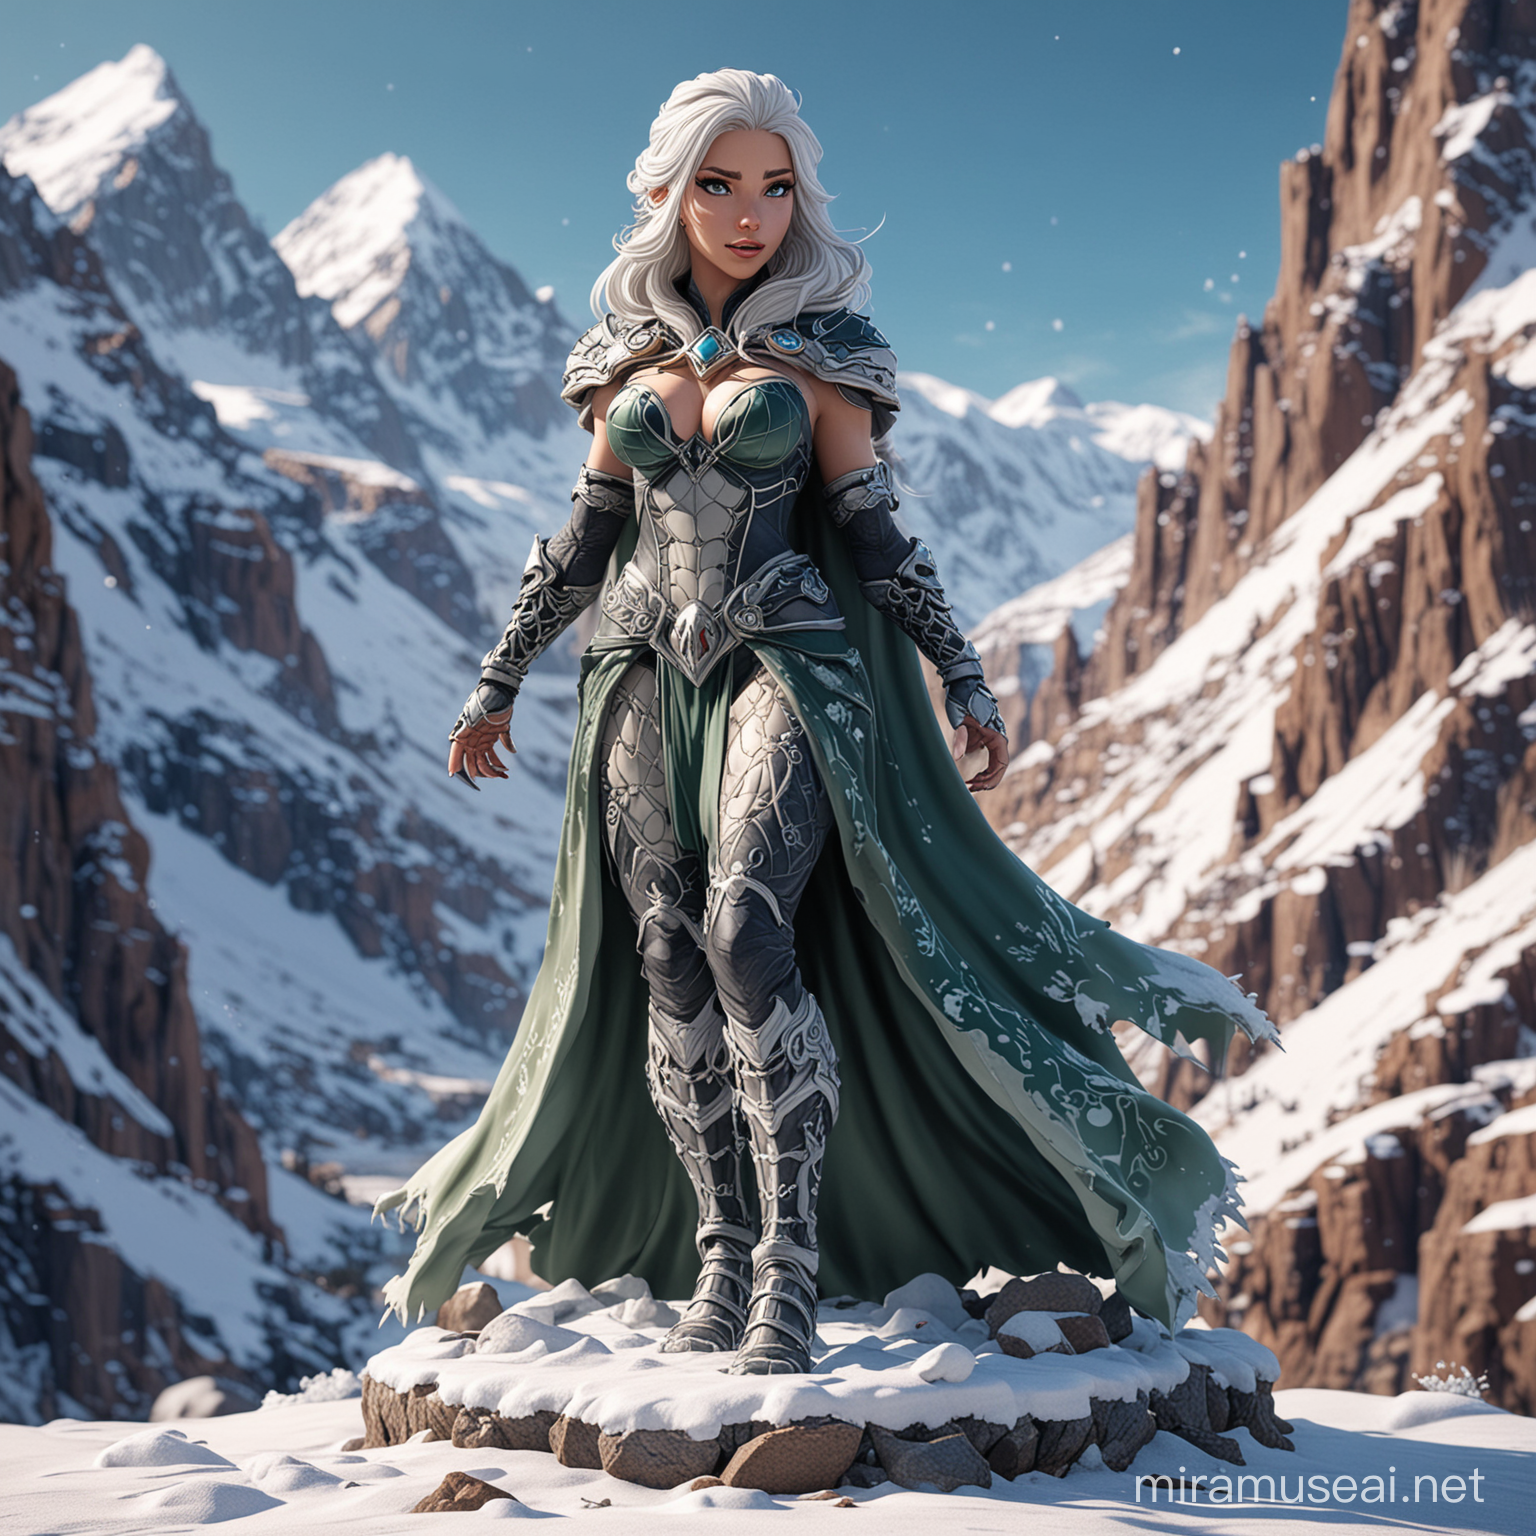 Serqet GODDESS OF VENOM,The image features a cartoon character wearing a garment. The character appears to be a fictional figure depicted in CG artwork, possibly in the form of a figurine.The image shows a rocky mountain covered with snow.